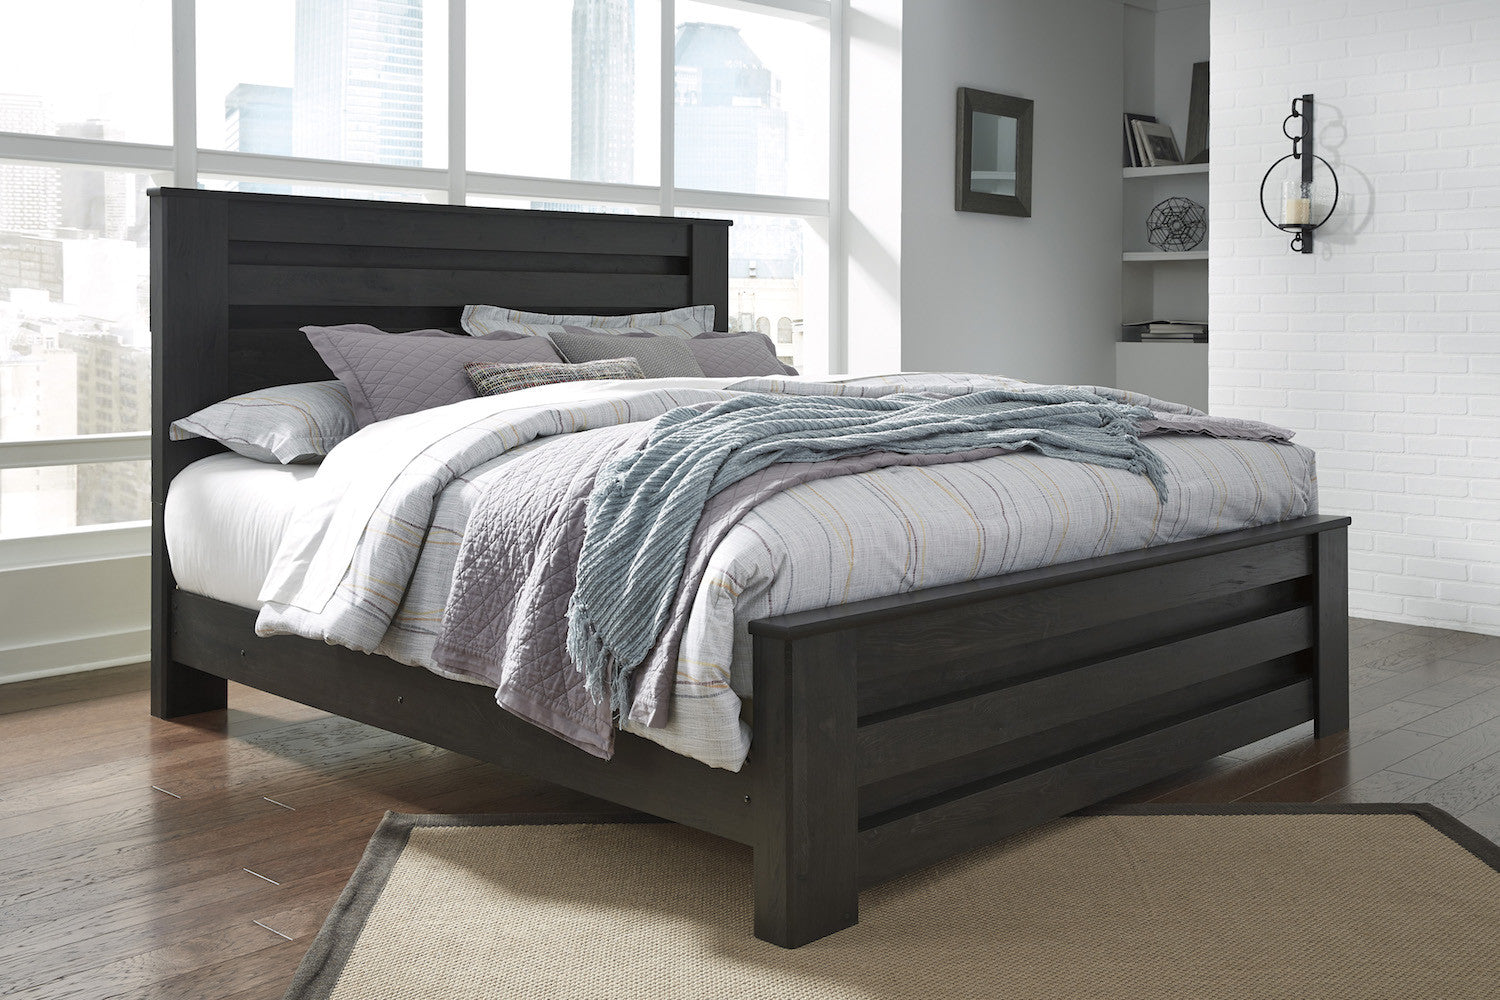 Ashley Brinxton E King Poster Bed In Black